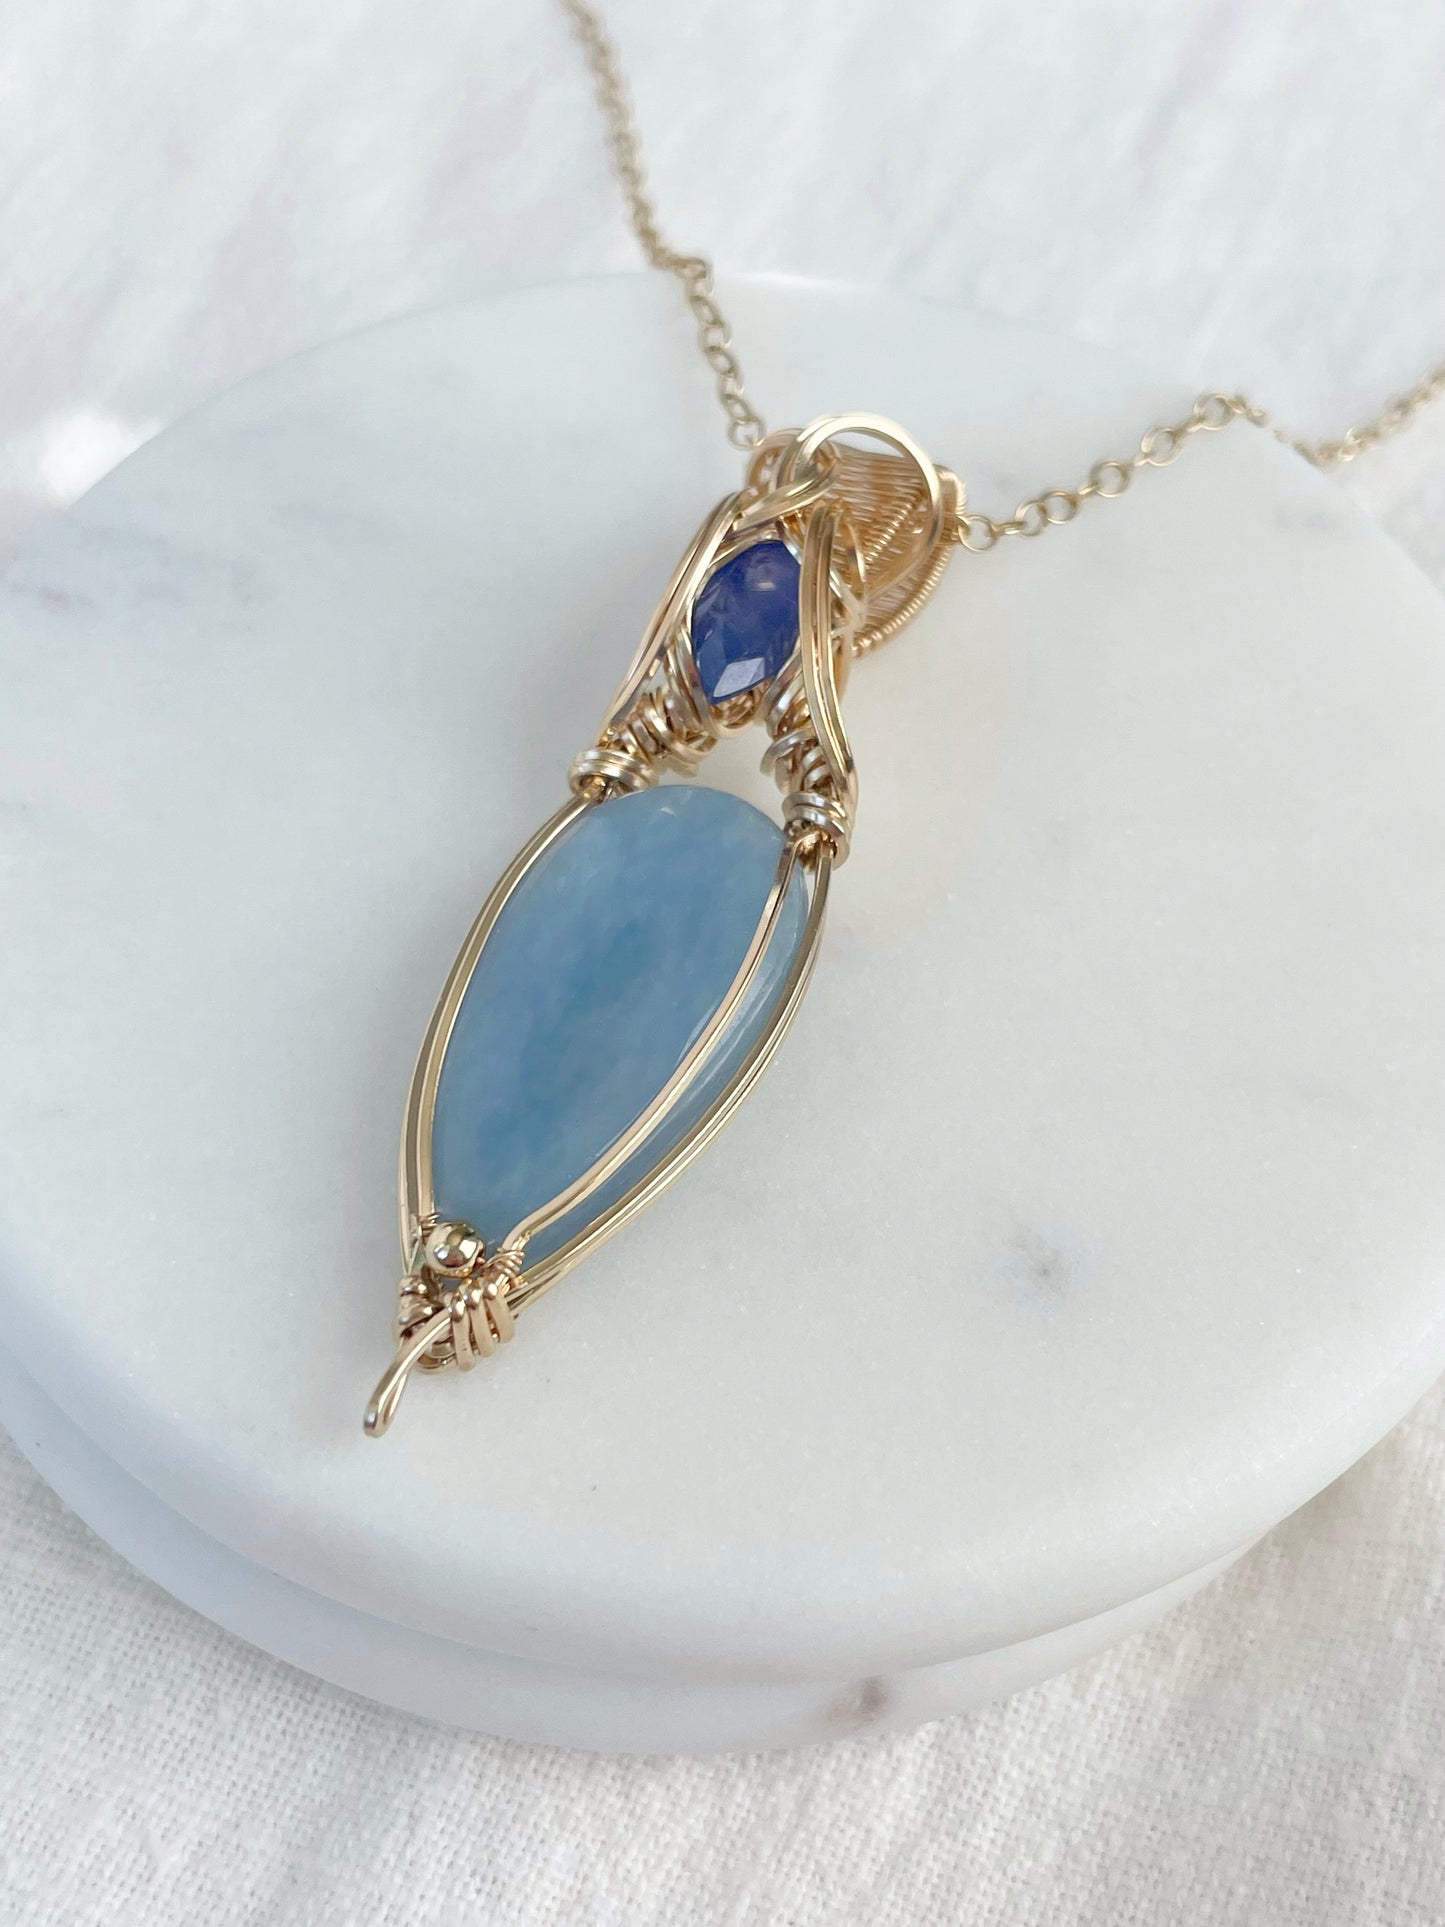 Angelite & Tanzanite Necklace in 14k Gold Filled